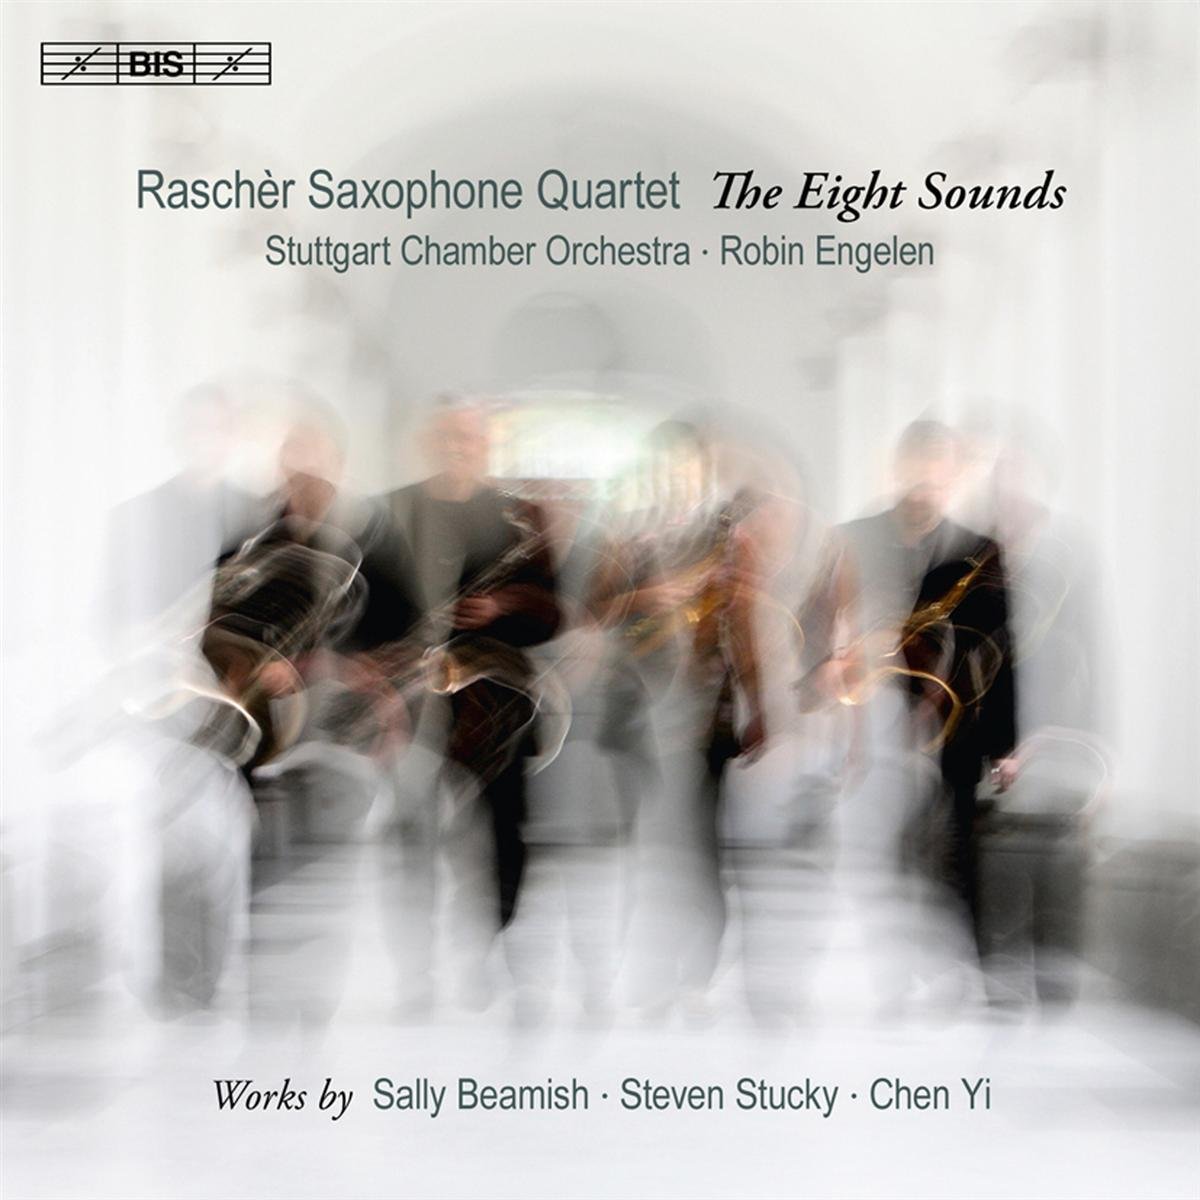 RASCHER SAXOPHONE QUARTET / ラシェール・サクソフォン四重奏団 / EIGHT SOUNDS - WORKS FOR SAXOPHONE QUARTET AND STRINGS